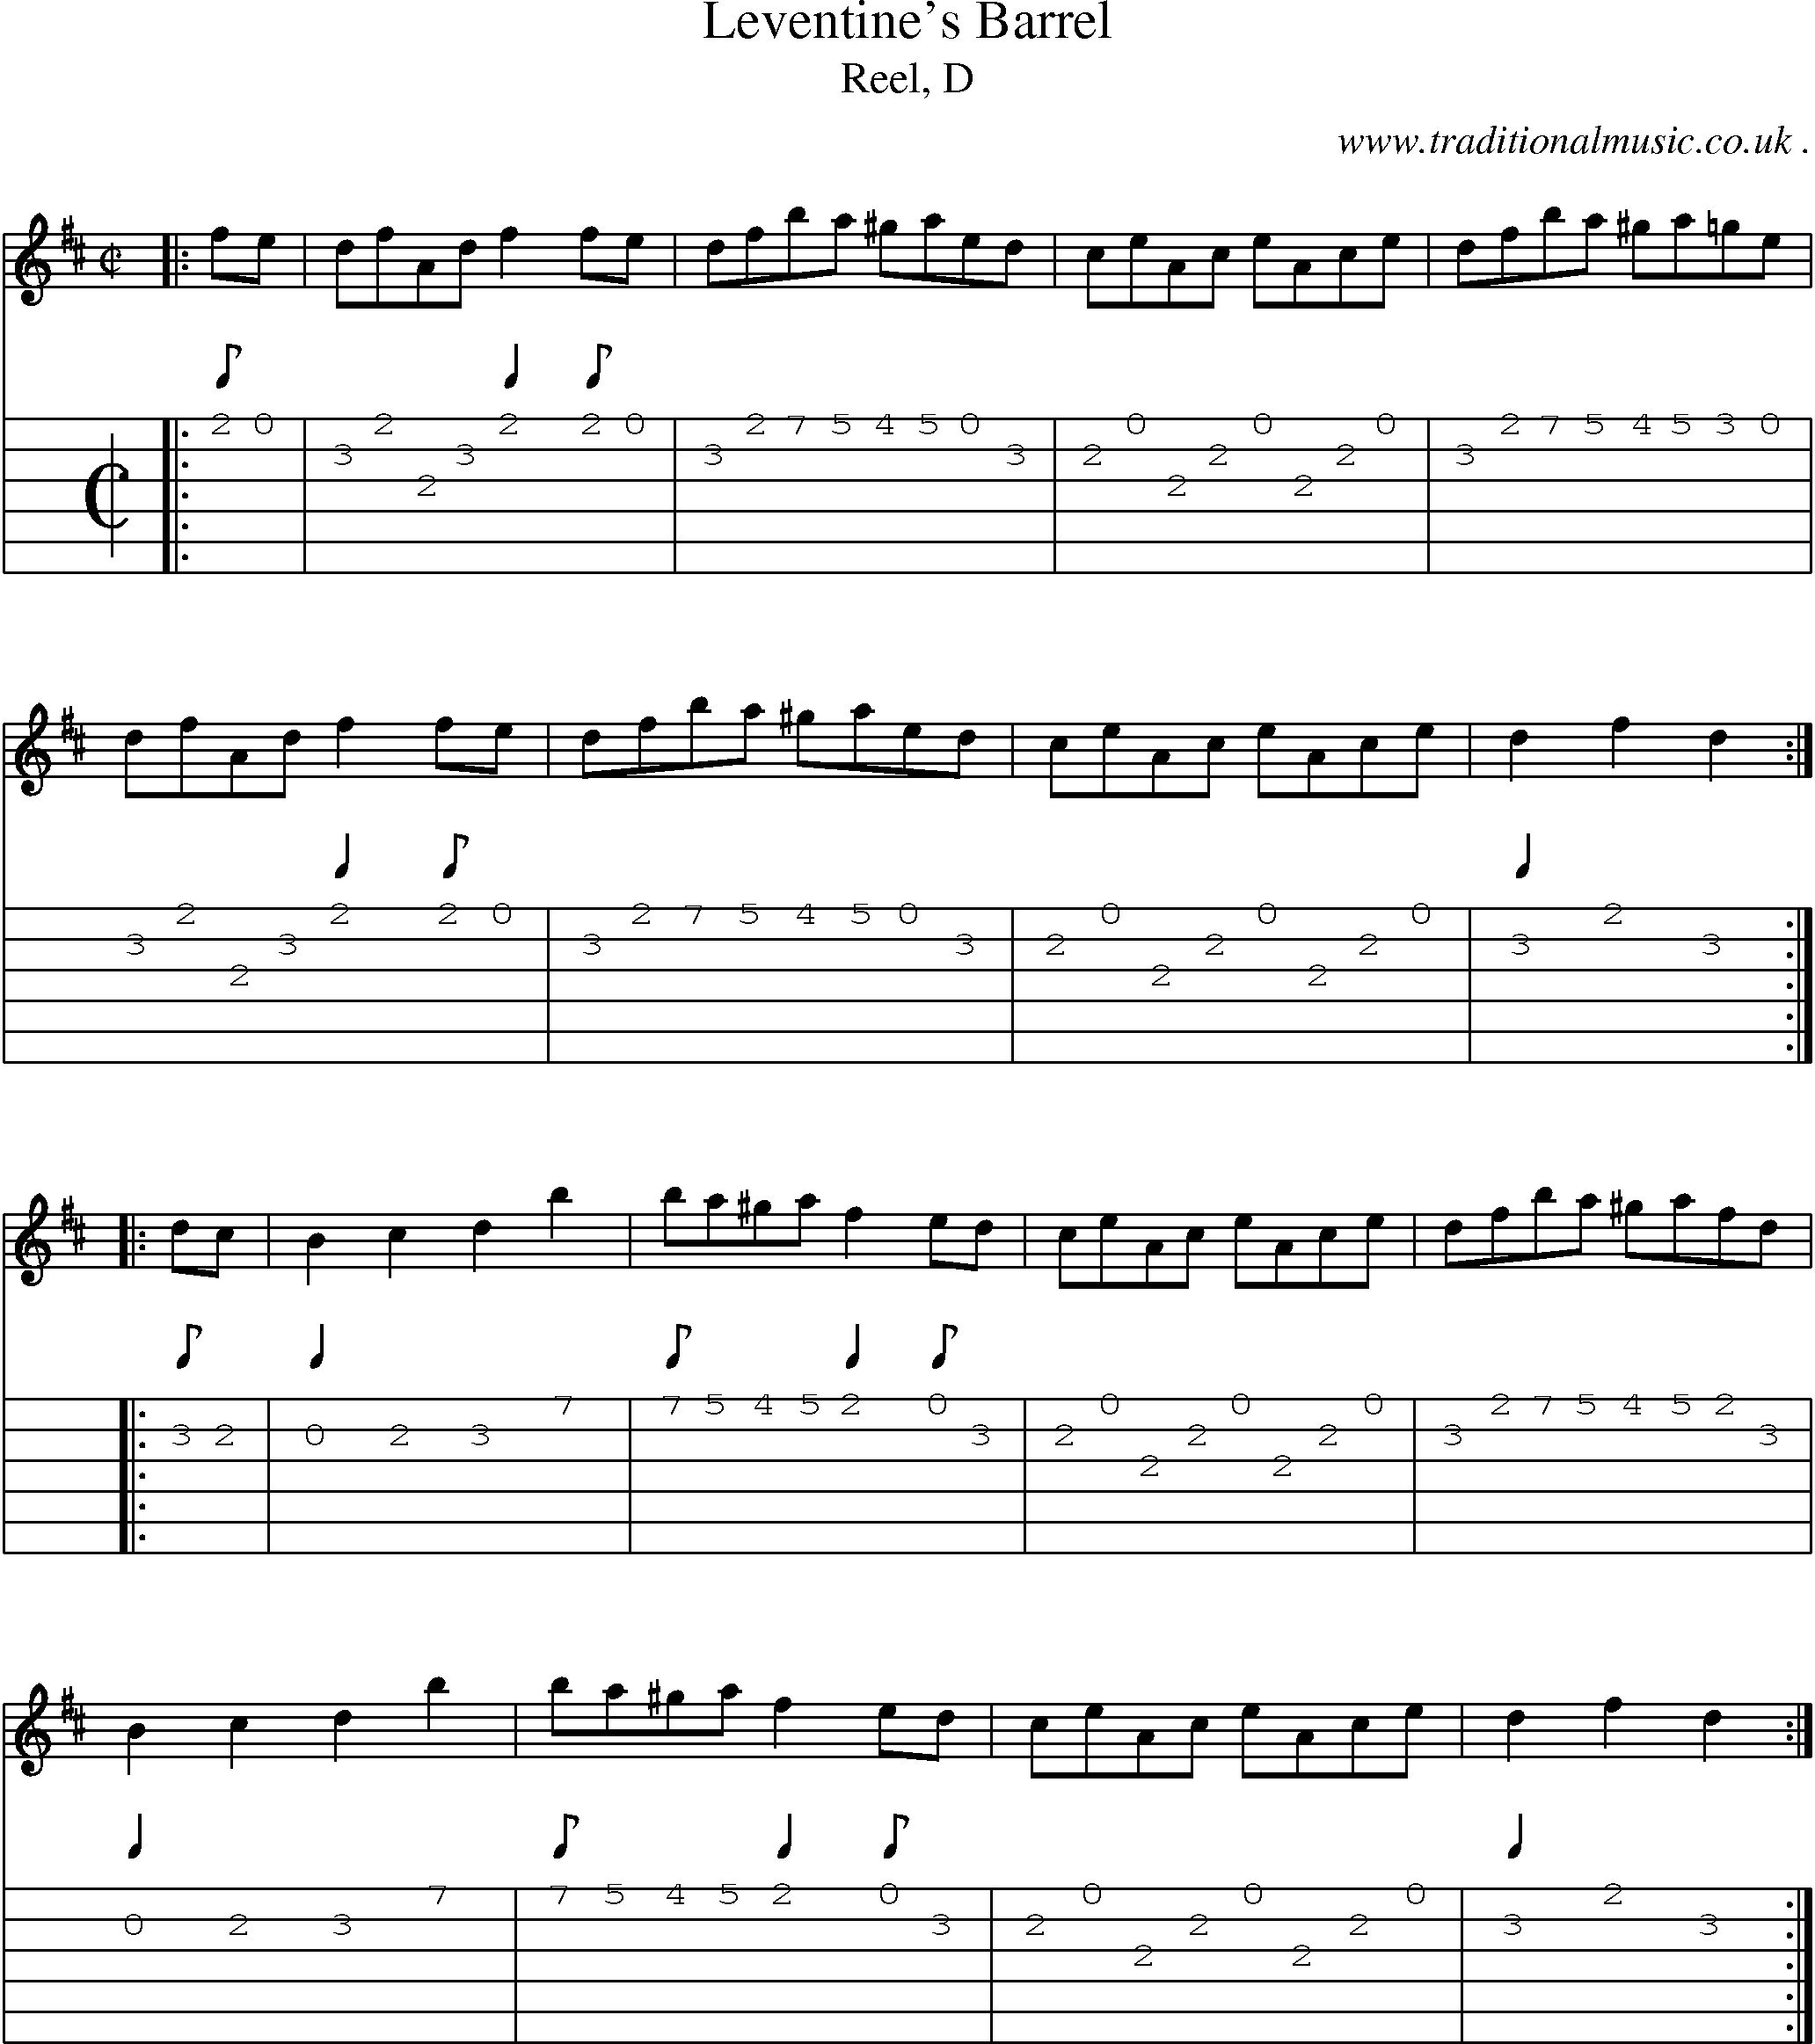 Sheet-music  score, Chords and Guitar Tabs for Leventines Barrel